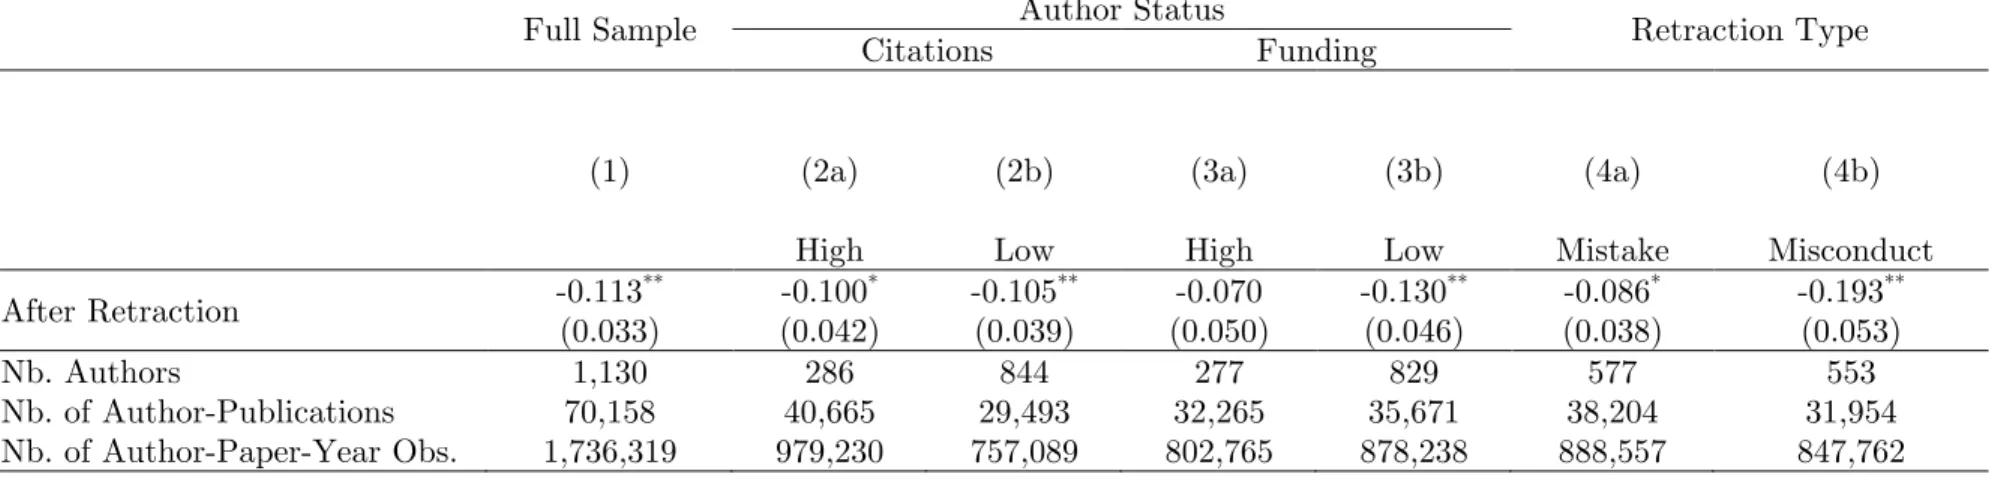 Table 3: Citations to Pre-Retraction Articles, by Author Prominence and Misconduct